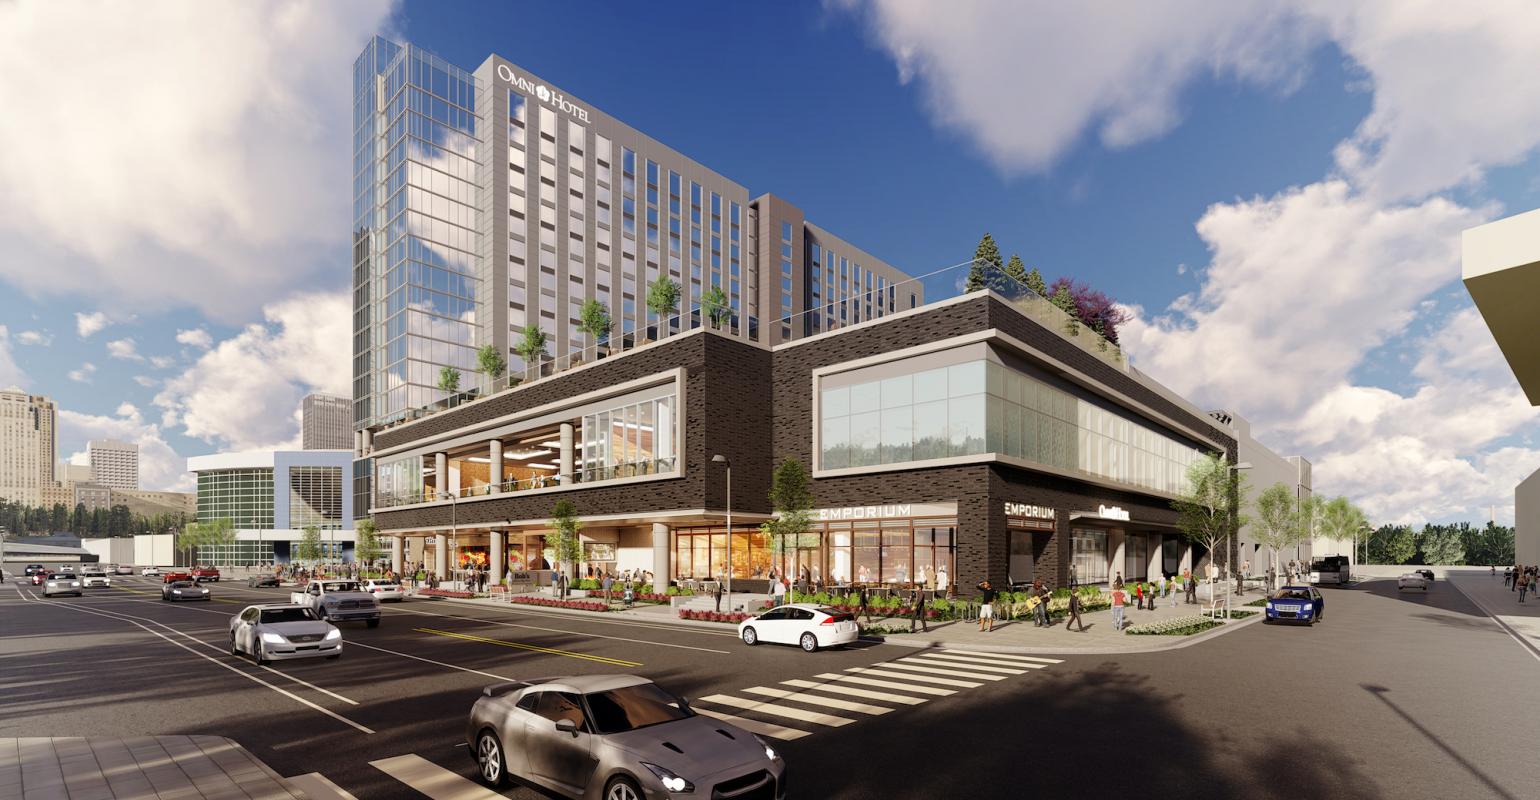 Omni Invests in OKC, Breaks Ground on Convention Property | MeetingsNet